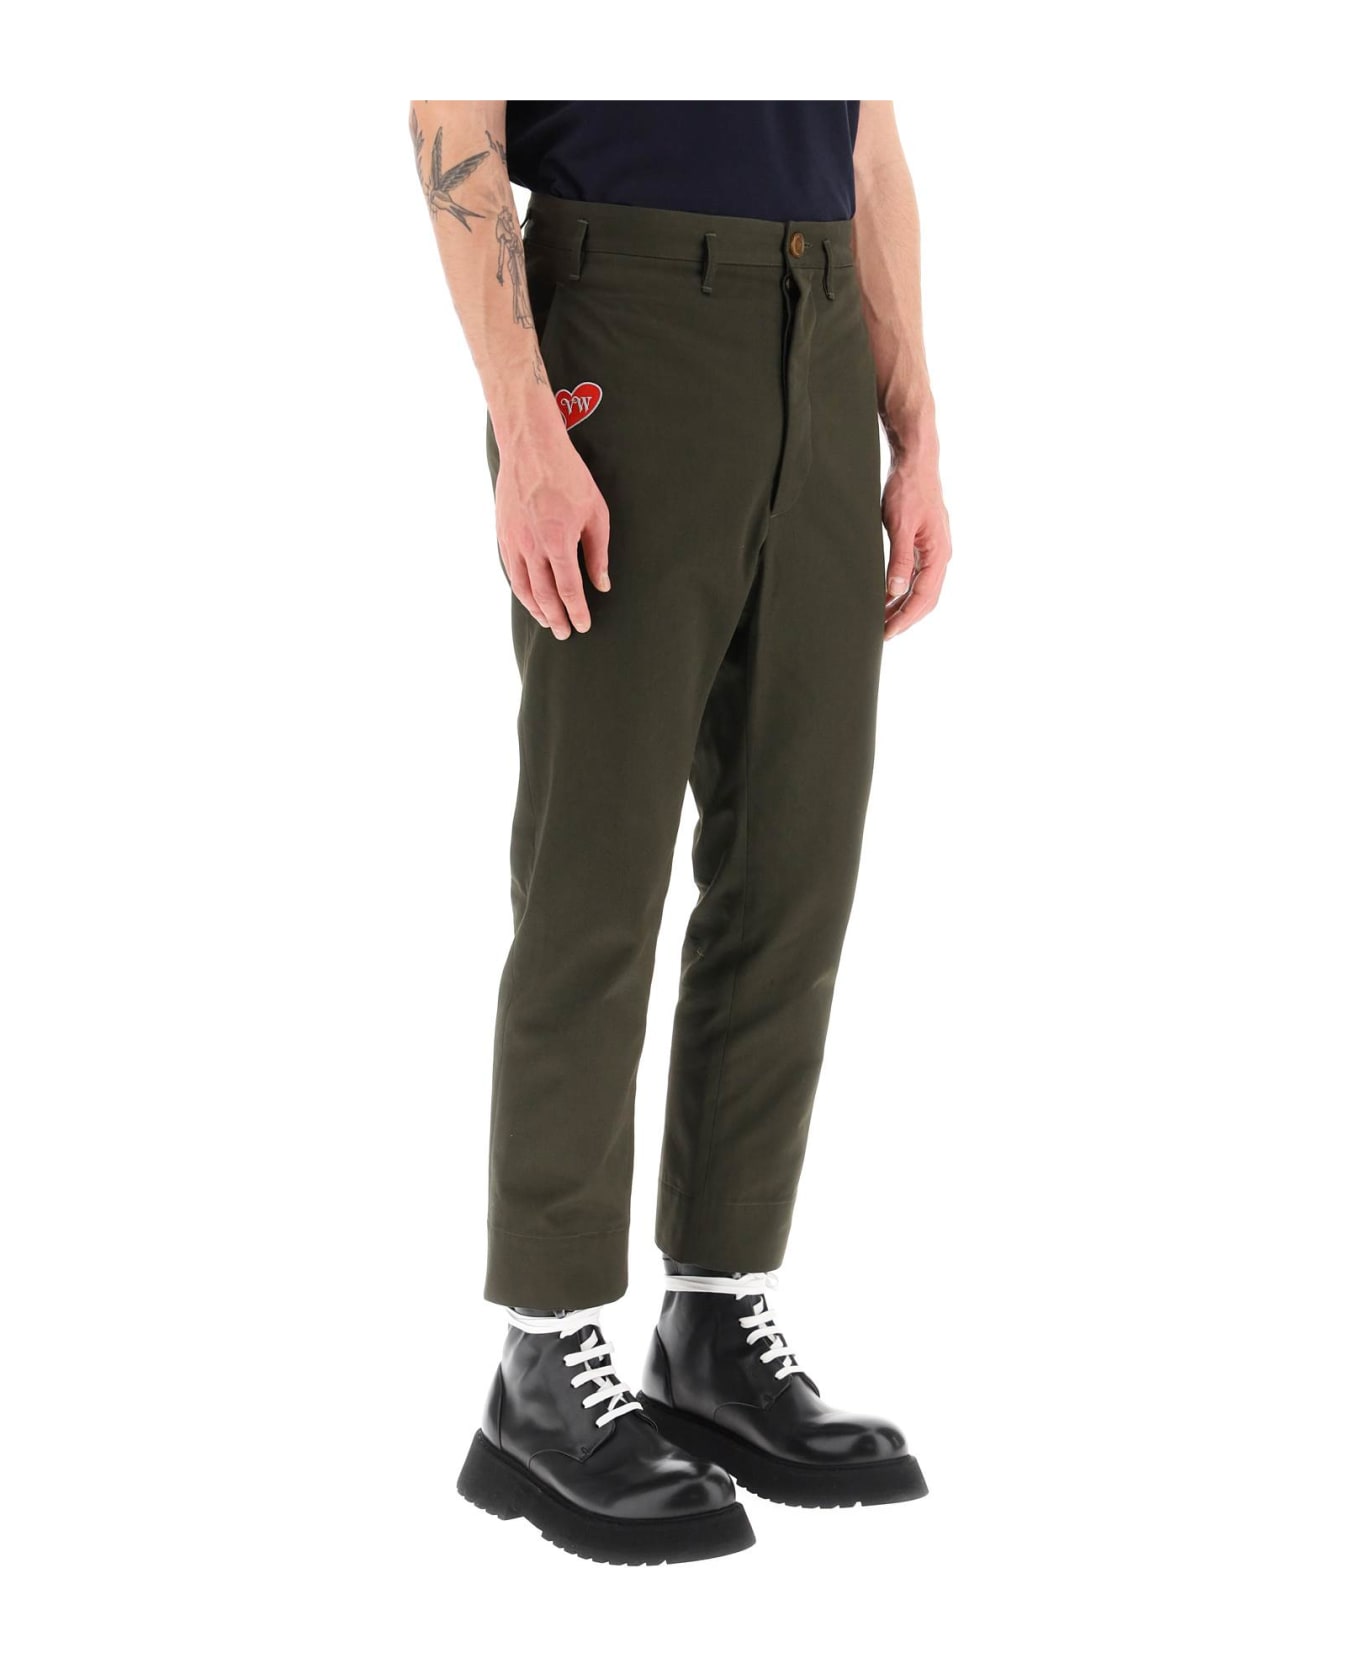 Vivienne Westwood Cropped Cruise Pants Featuring Embroidered Heart-shaped Logo - MILITARY GREEN (Green)